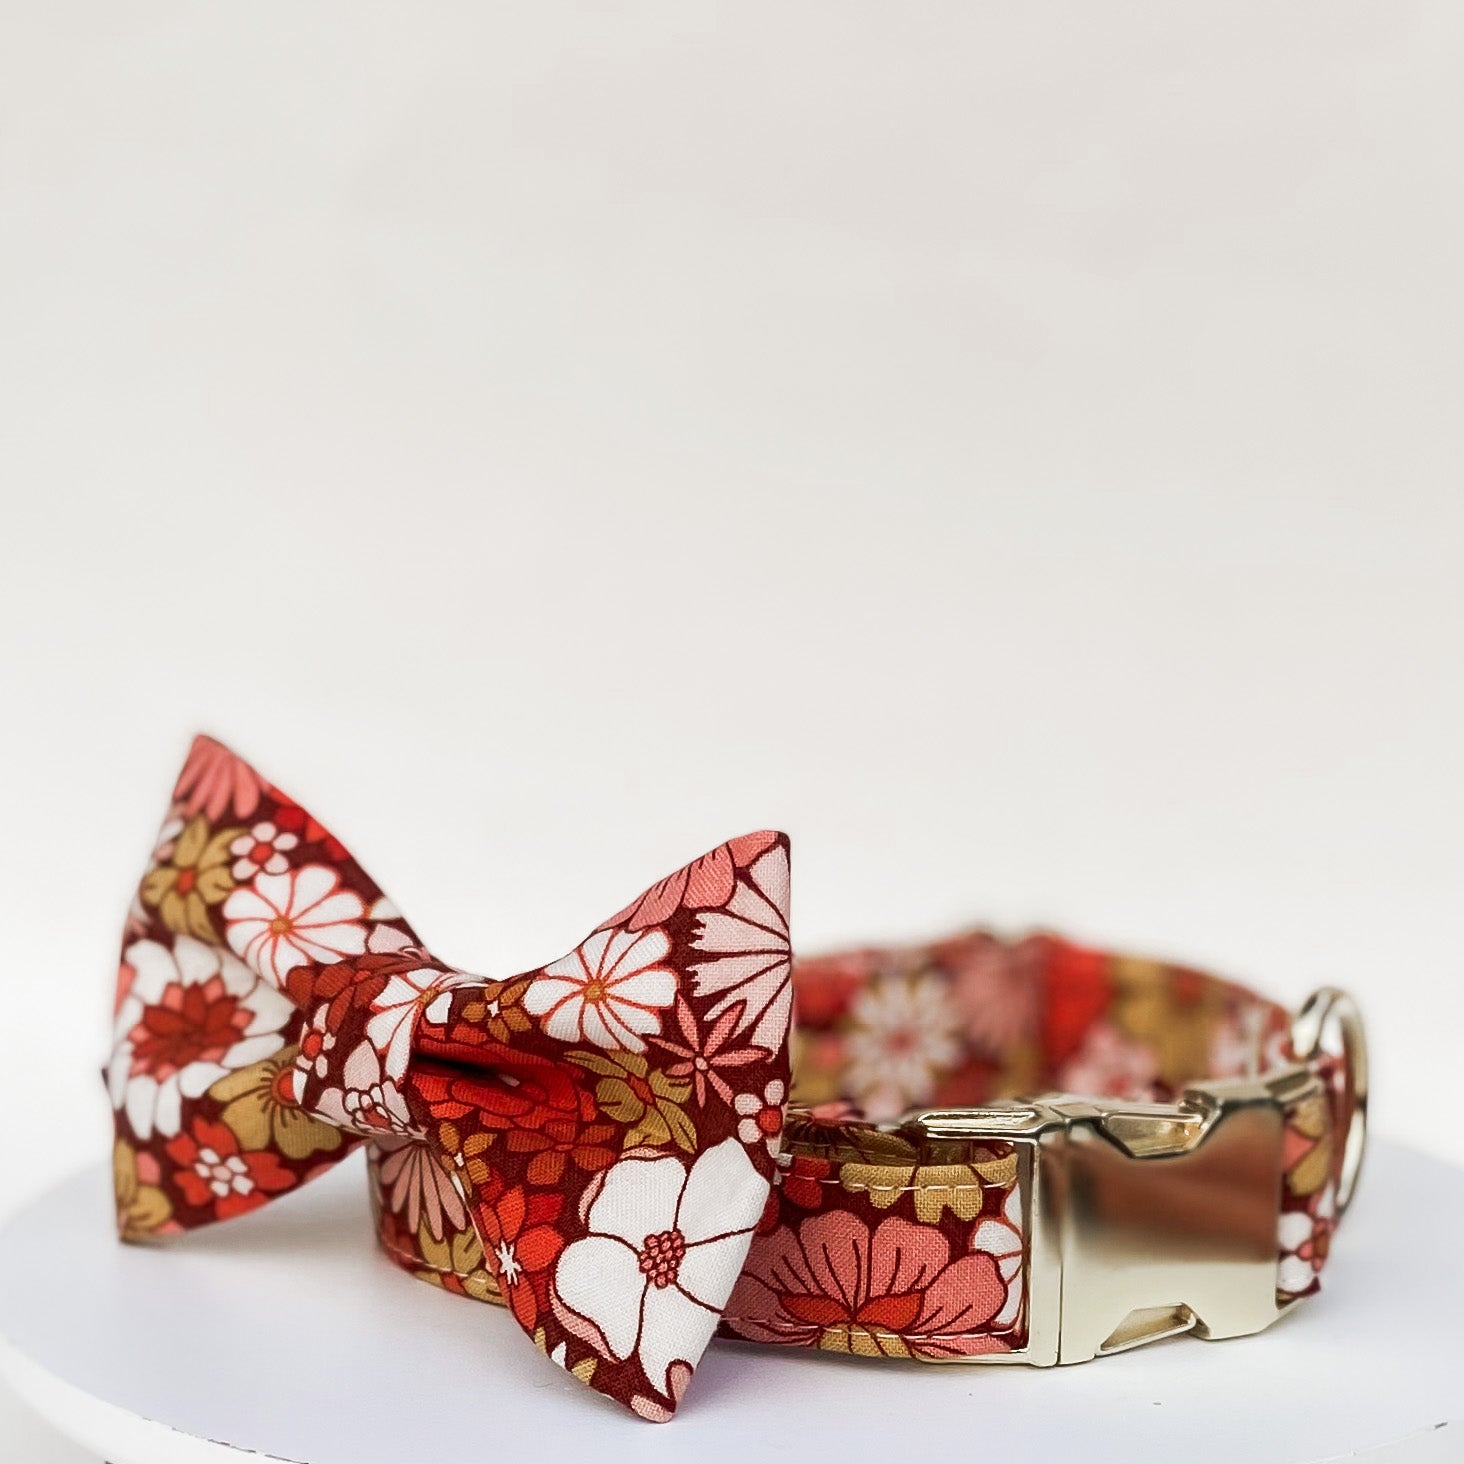 Groovy floral fall dog bow tie